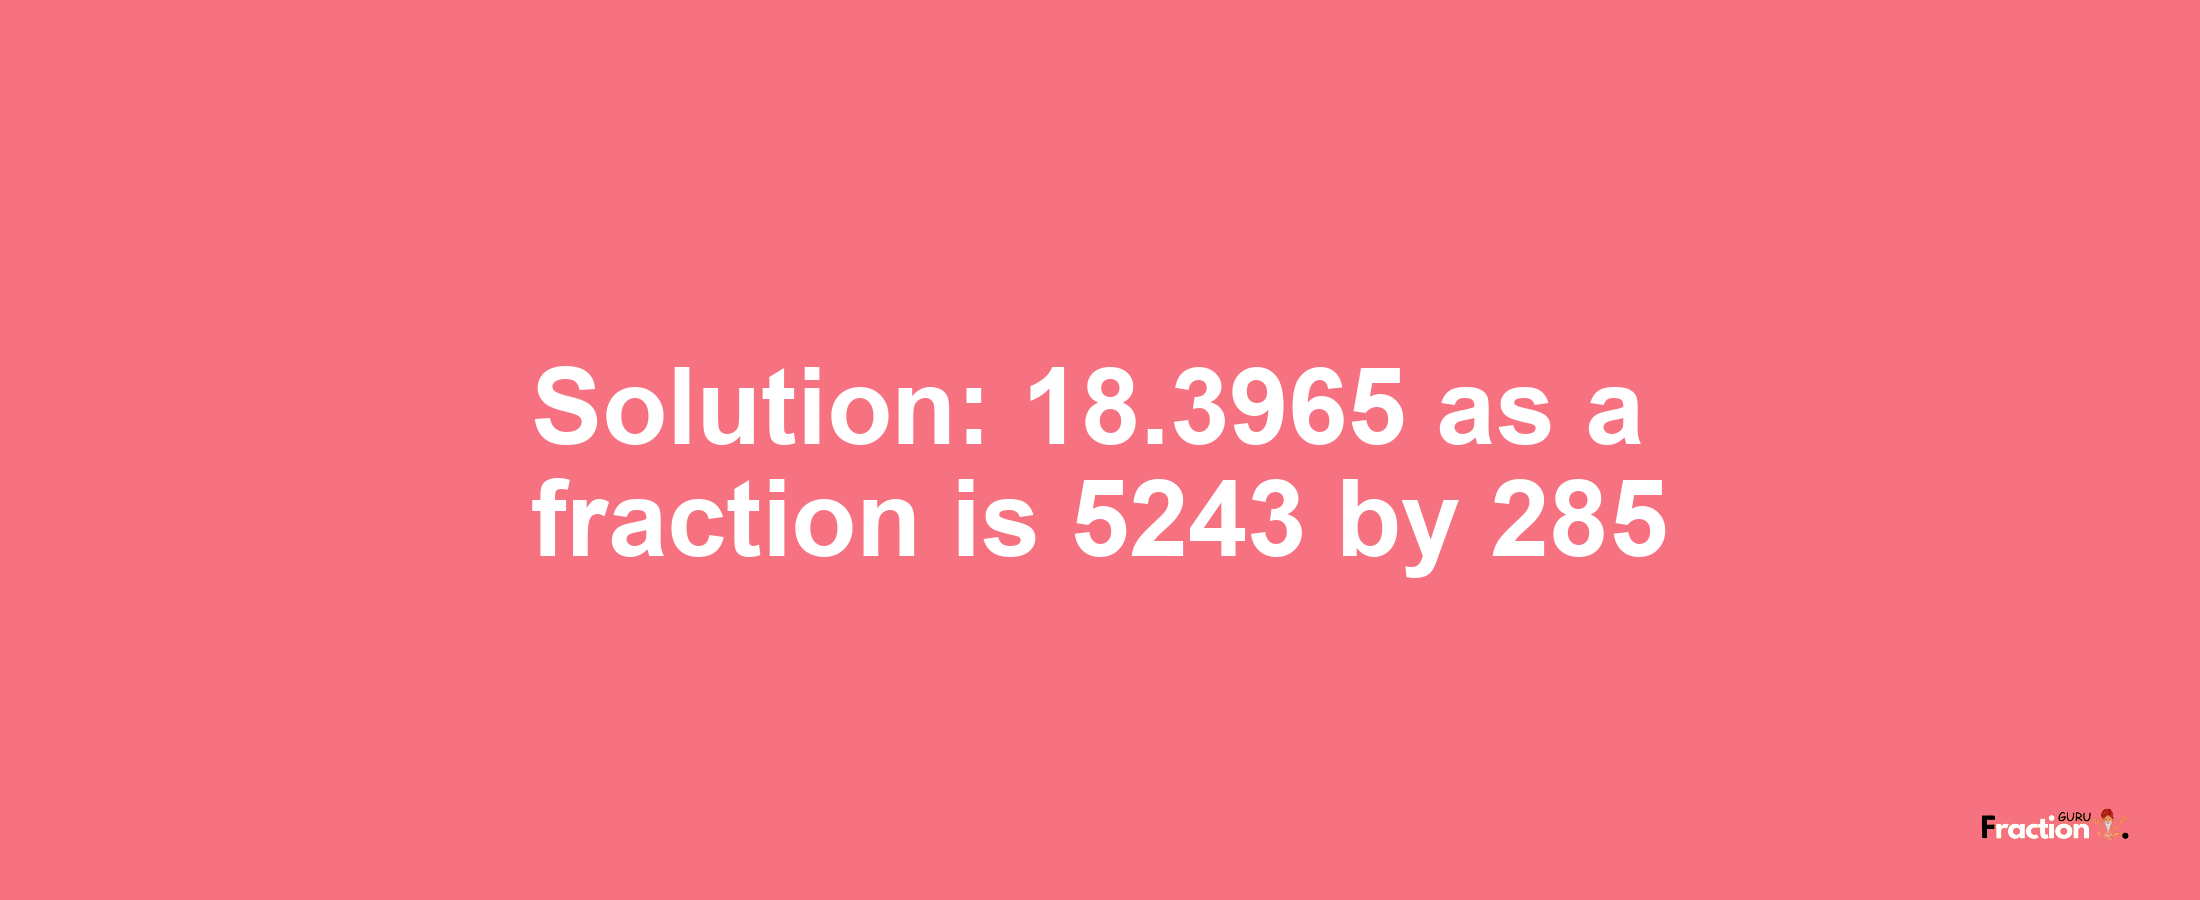 Solution:18.3965 as a fraction is 5243/285